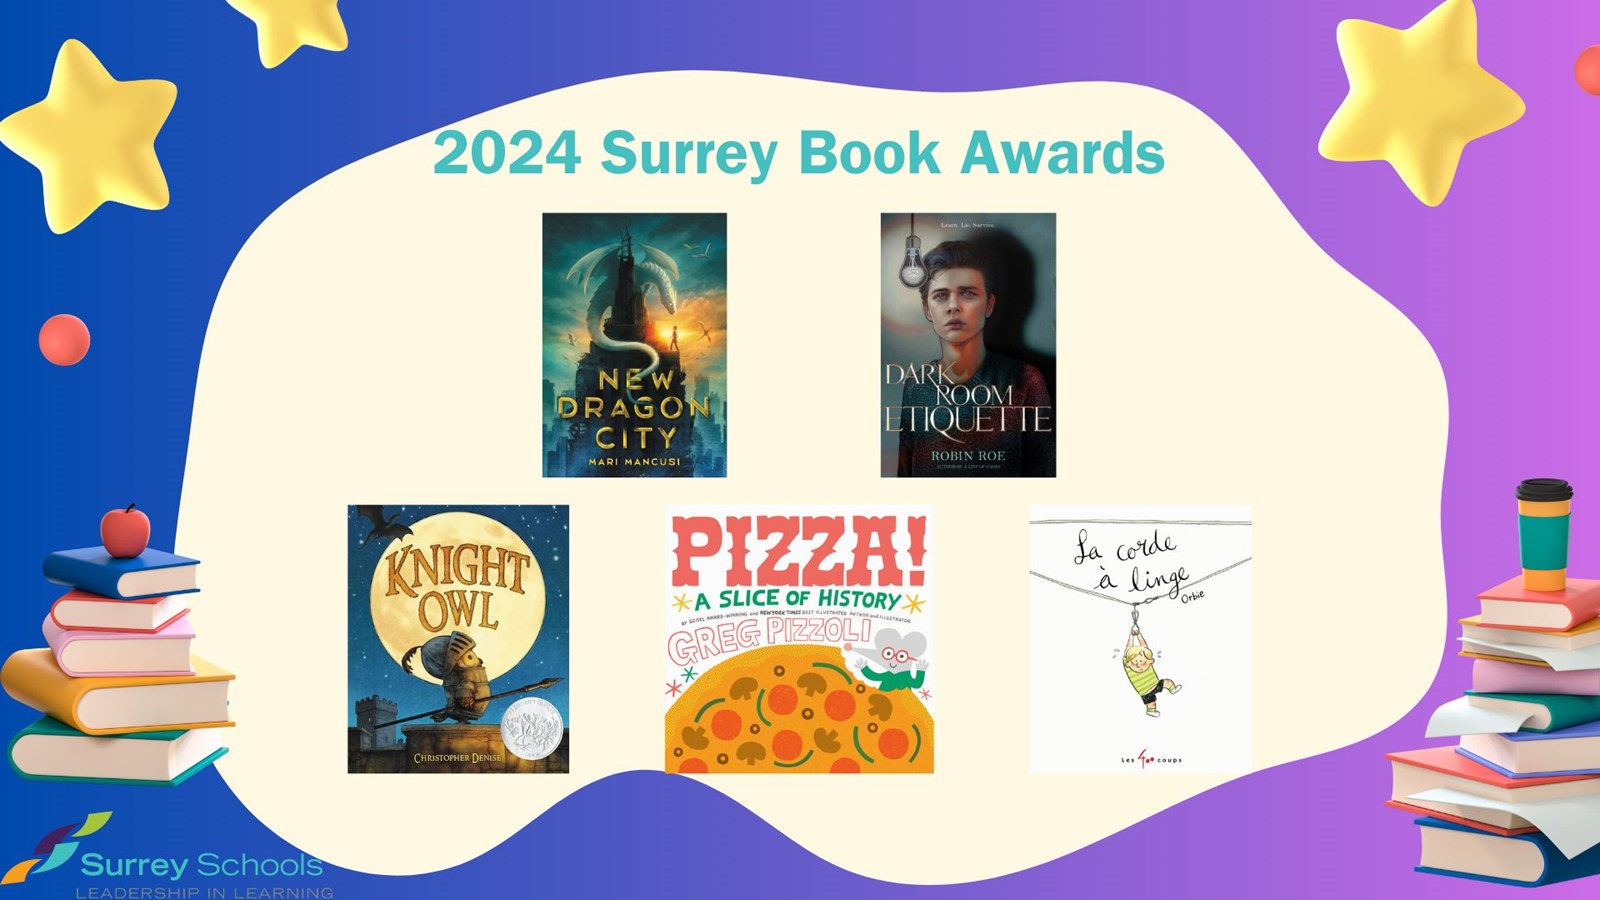 Student-selected Surrey Book Award winners provide great summer reads